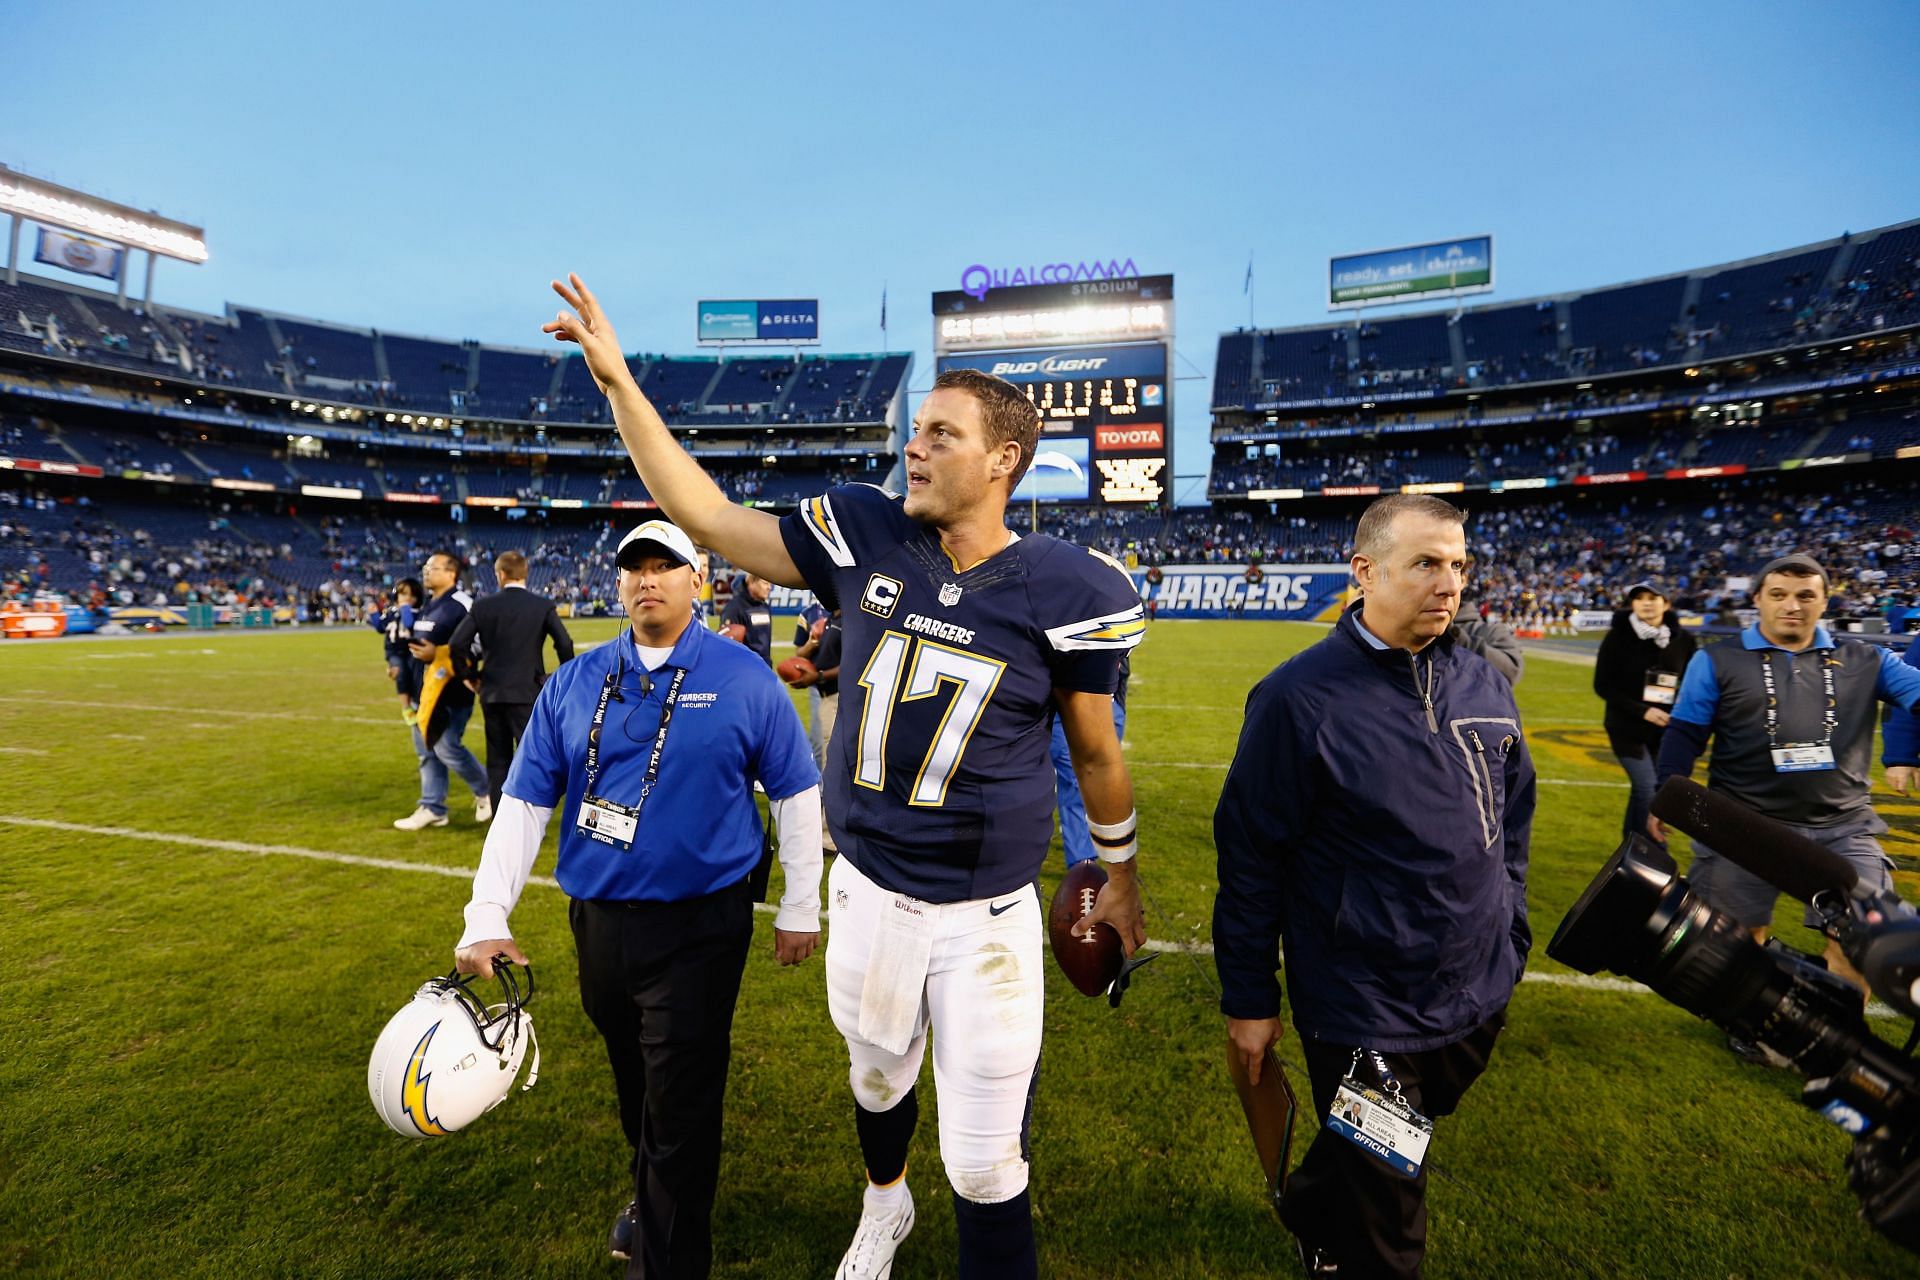 Philip Rivers at Miami Dolphins v San Diego Chargers